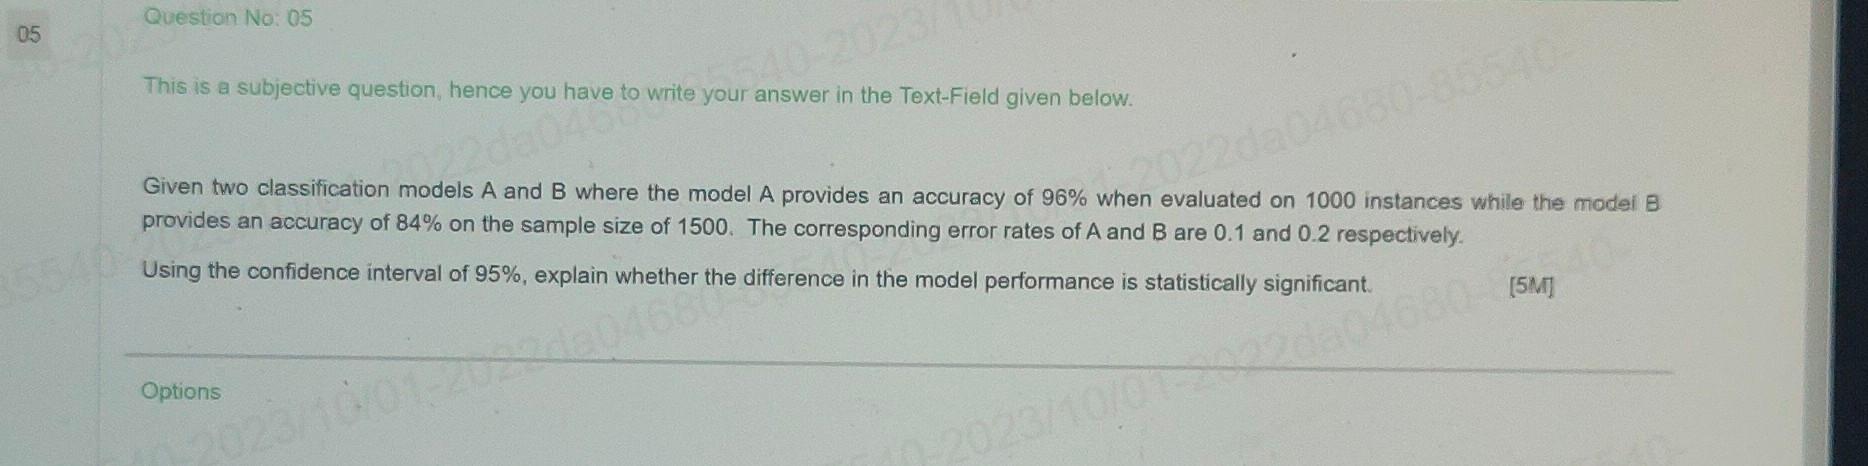 05 Question No: 05 This is a subjective question, hence you have to write your answer in the Text-Field given